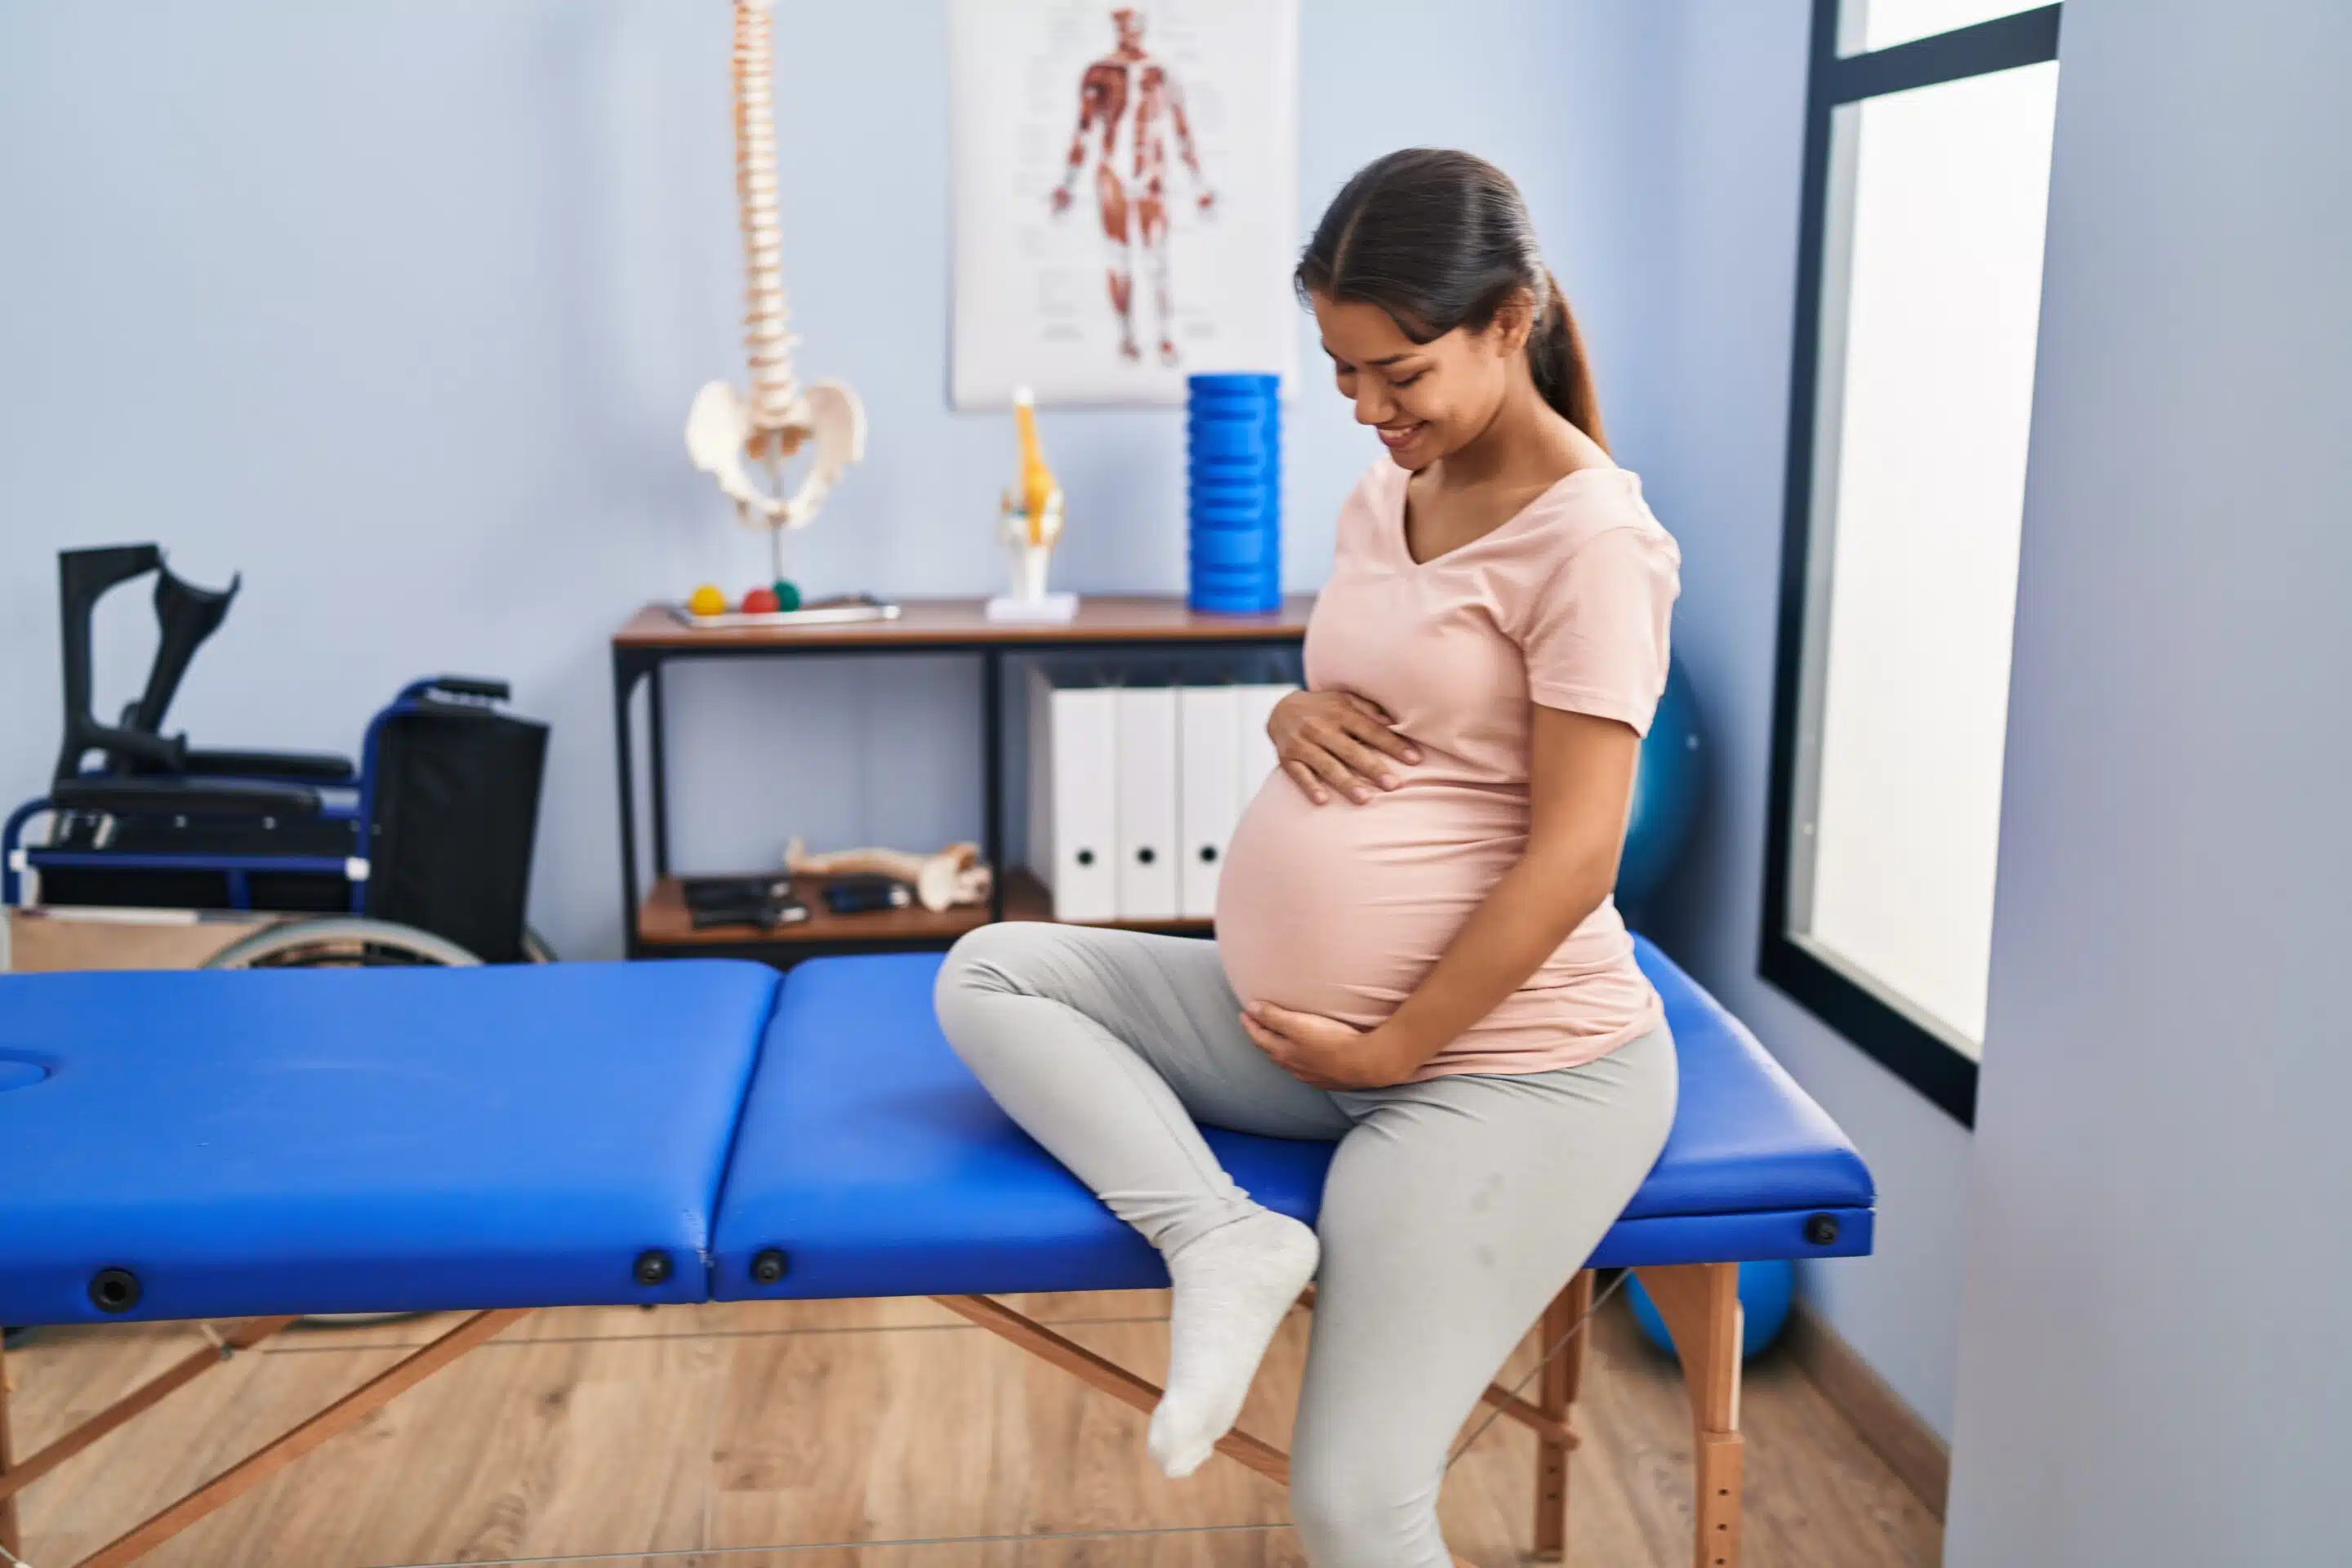 https://eadn-wc04-5744503.nxedge.io/cdn/wp-content/uploads/2023/01/the-benefits-of-prenatal-chiropractic-care-how-expectant-mothers-can-feel-their-best-scaled.jpeg